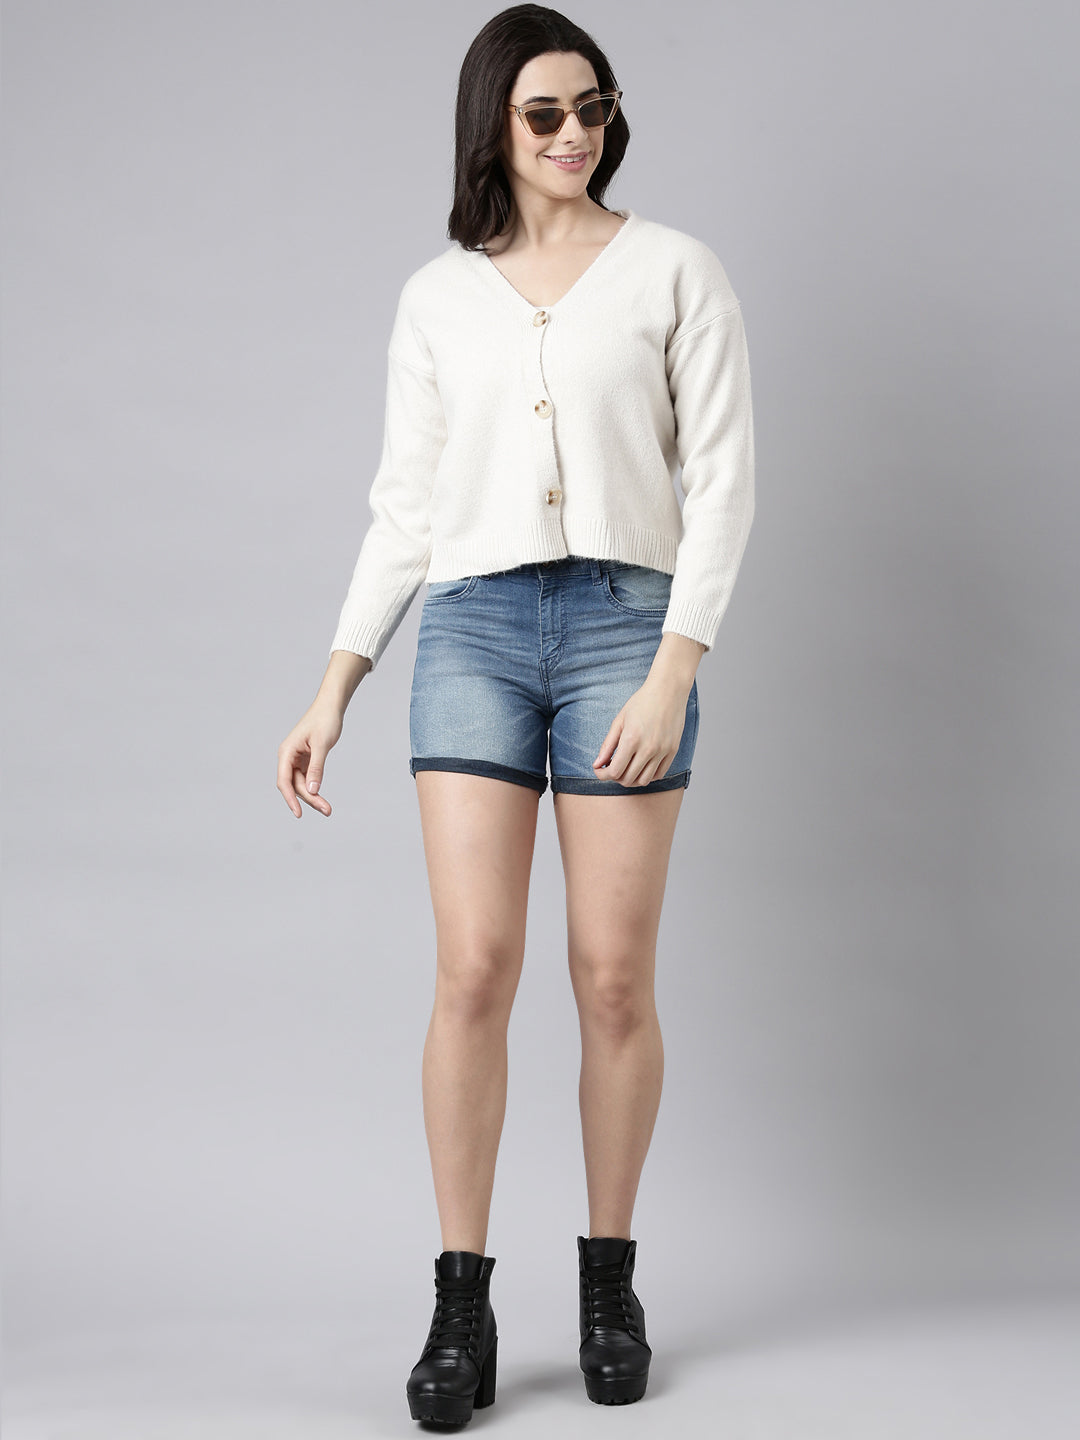 Women Solid Cream Cardigan Comes with Inner Slip